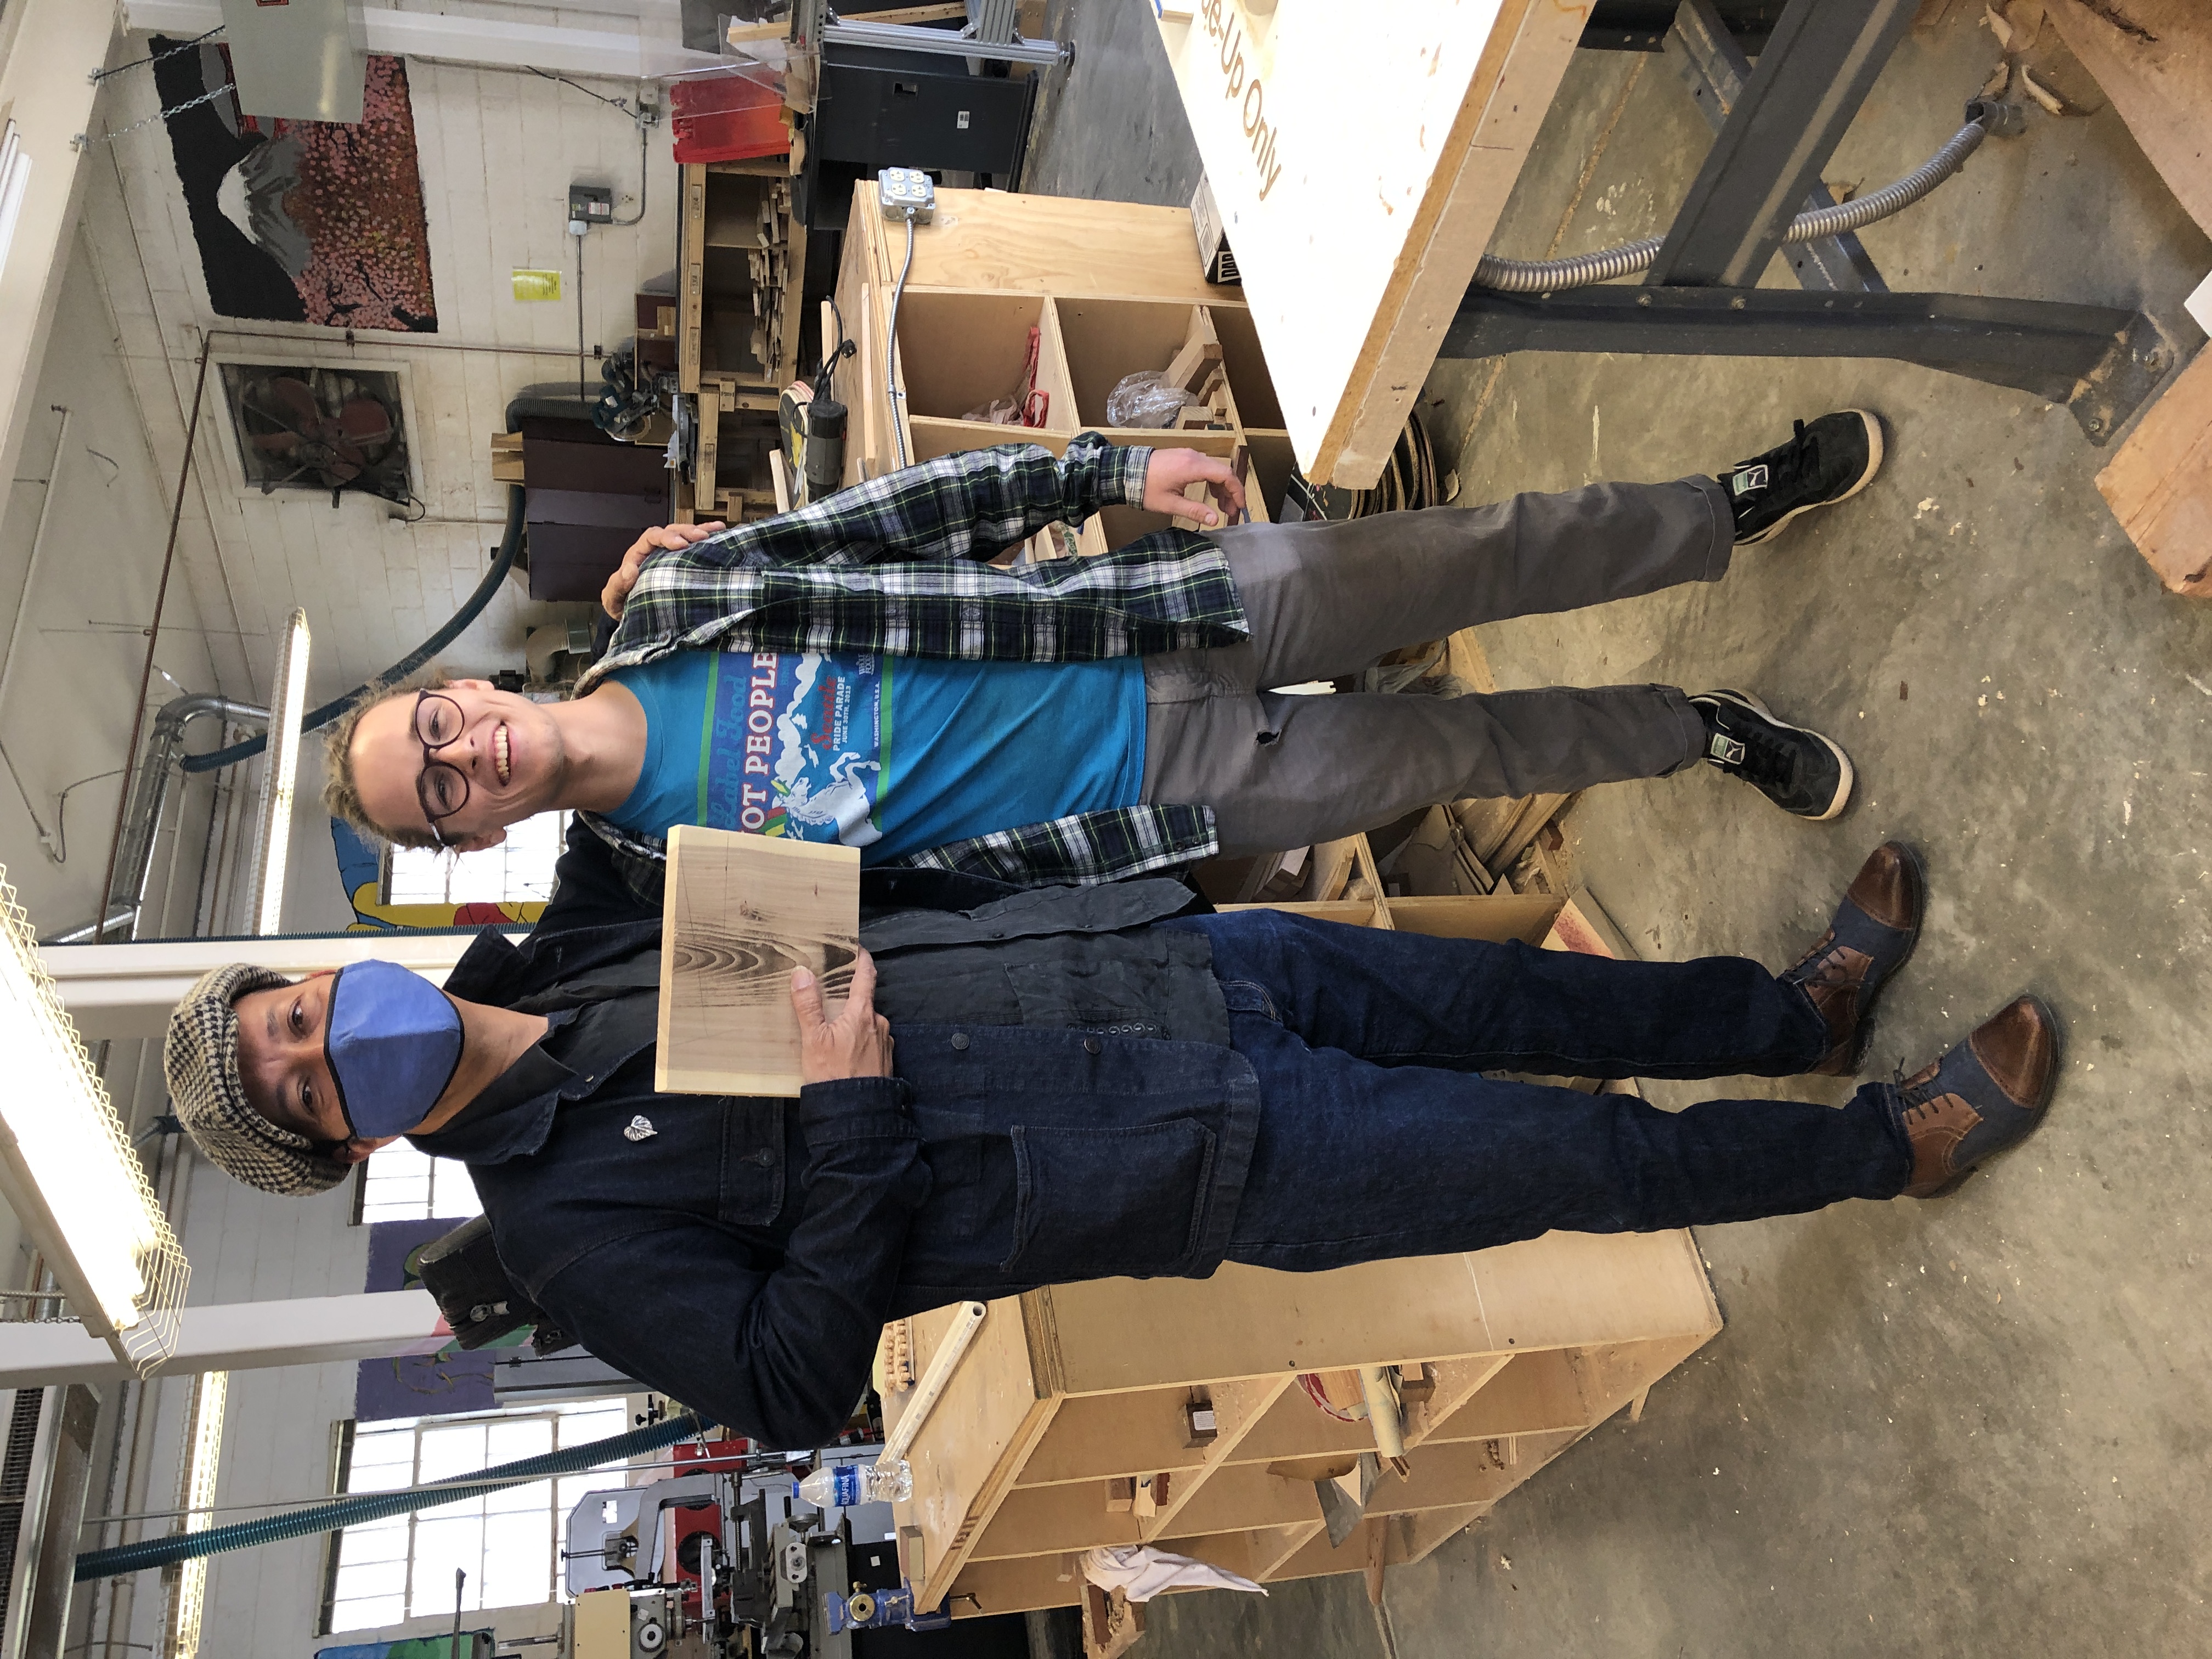 Thaddeus Driscoll (student of the MFJS2260 class) gives Mr. Gutiérrez a piece of Siberian Elm tree (Ulmus pumila) as a present to take to his luthier workshop back in Mexico. Photo by Verónica Pacheco.